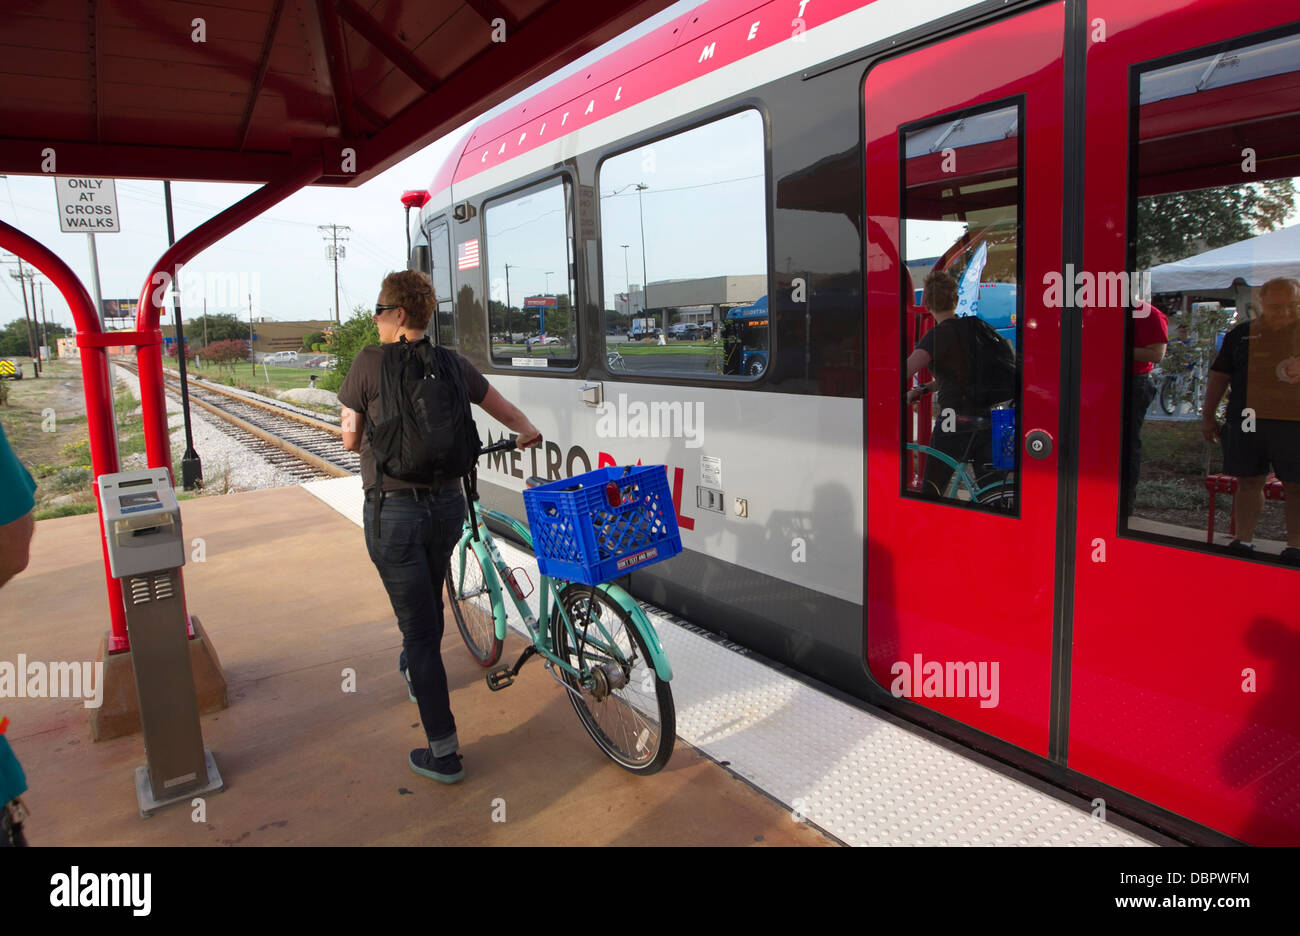 Female commuter exits a metro-rail train with her bicycle at a public transportation stop in Austin, Texas Stock Photo